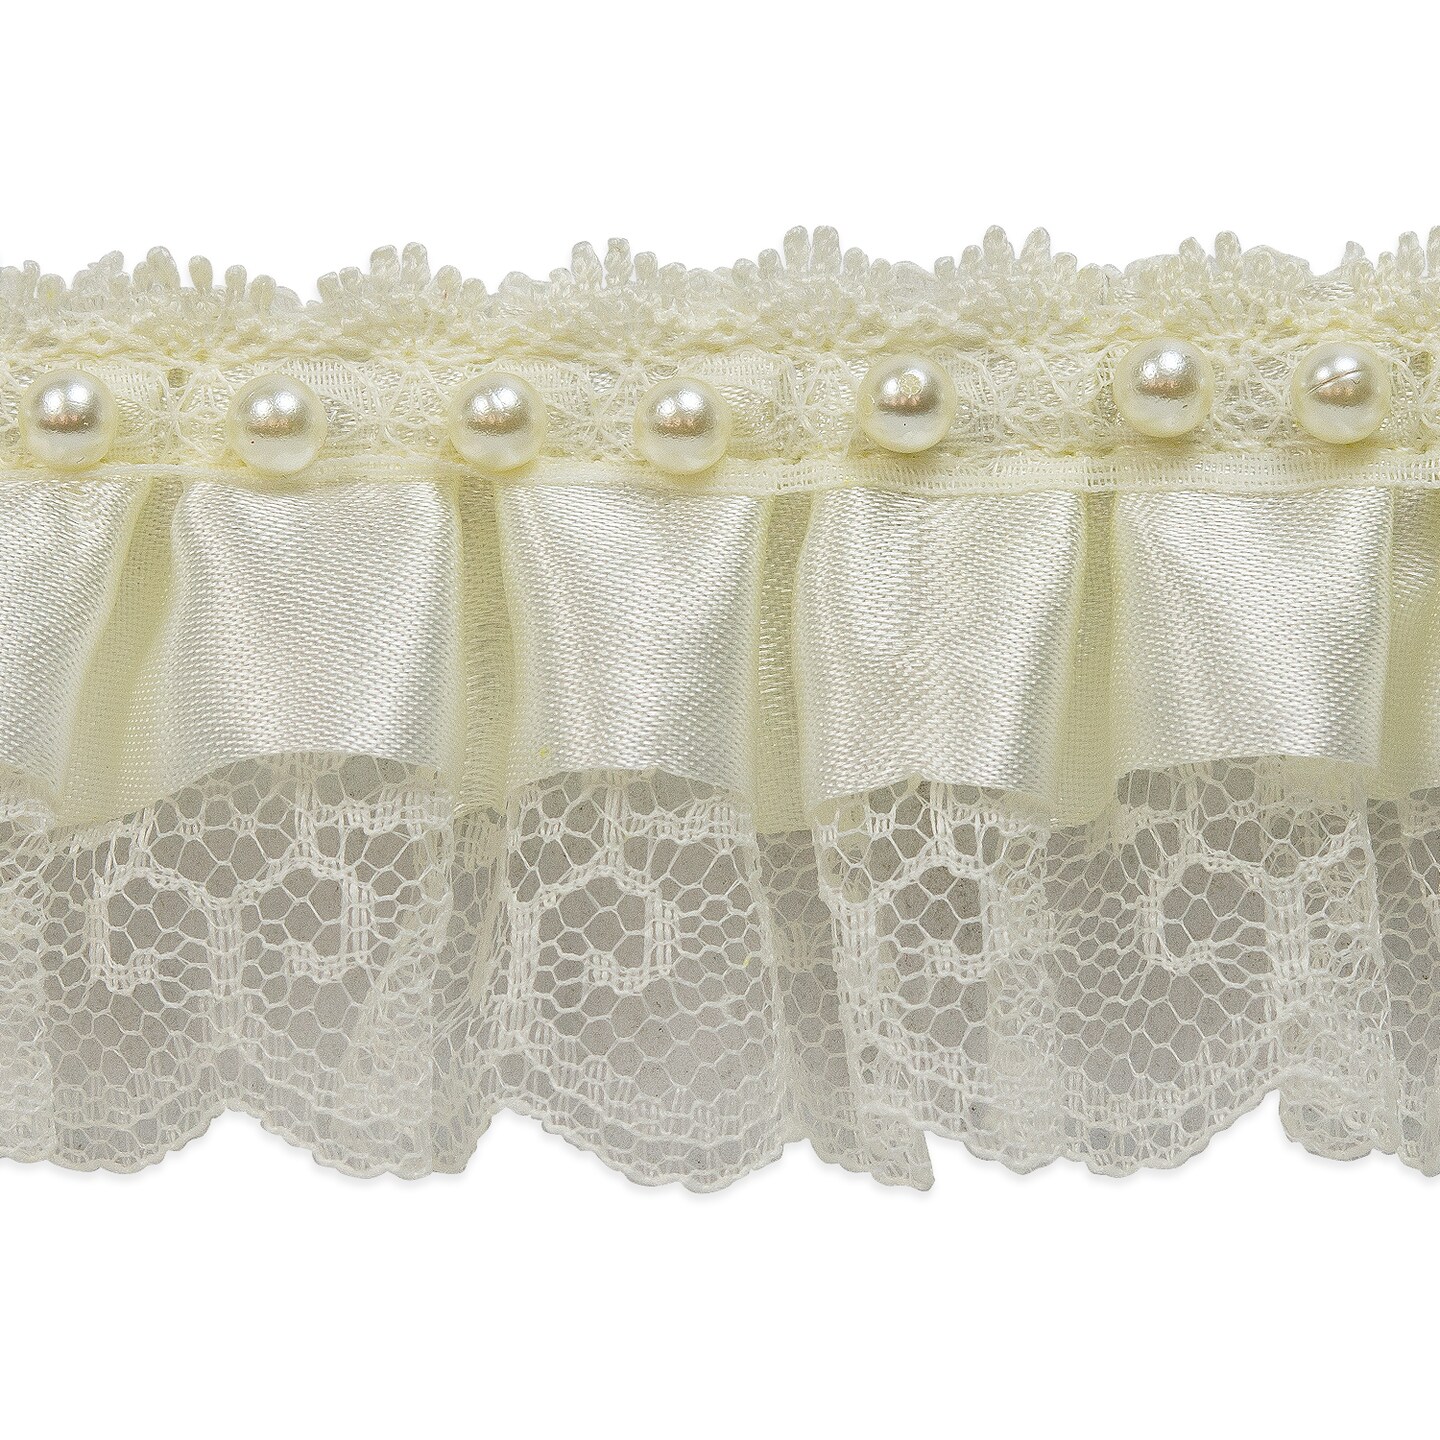 5 Yards of Bradshaw 2" Pearl Accent Ruffled Lace Trim